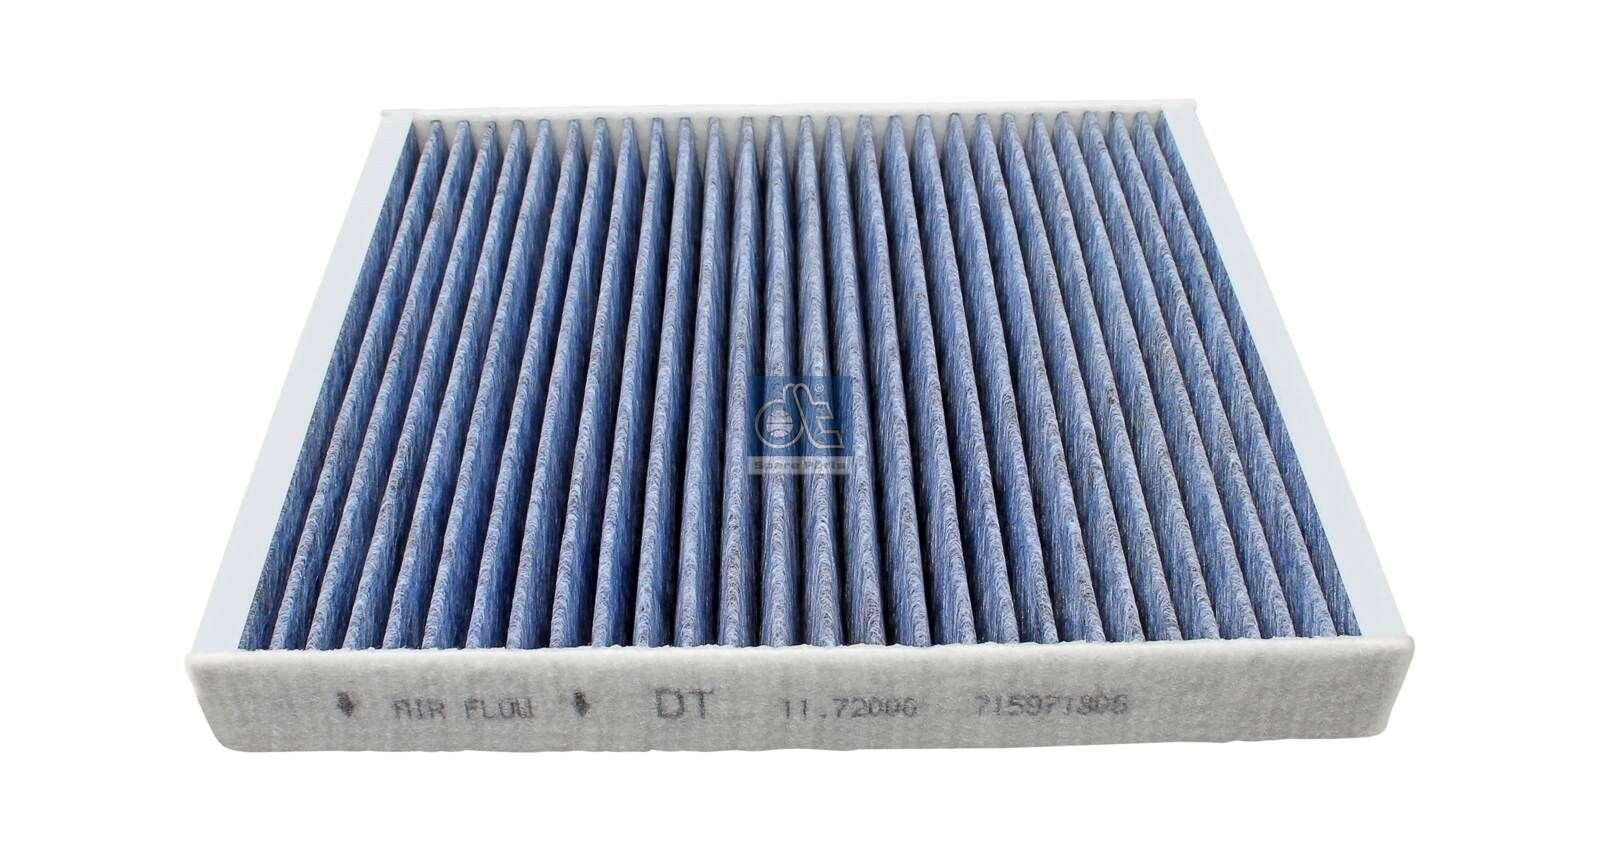 DT Spare Parts 11.72000 Pollen filter bio-functional cabin air filter, 254 mm x 235 mm x 32 mm